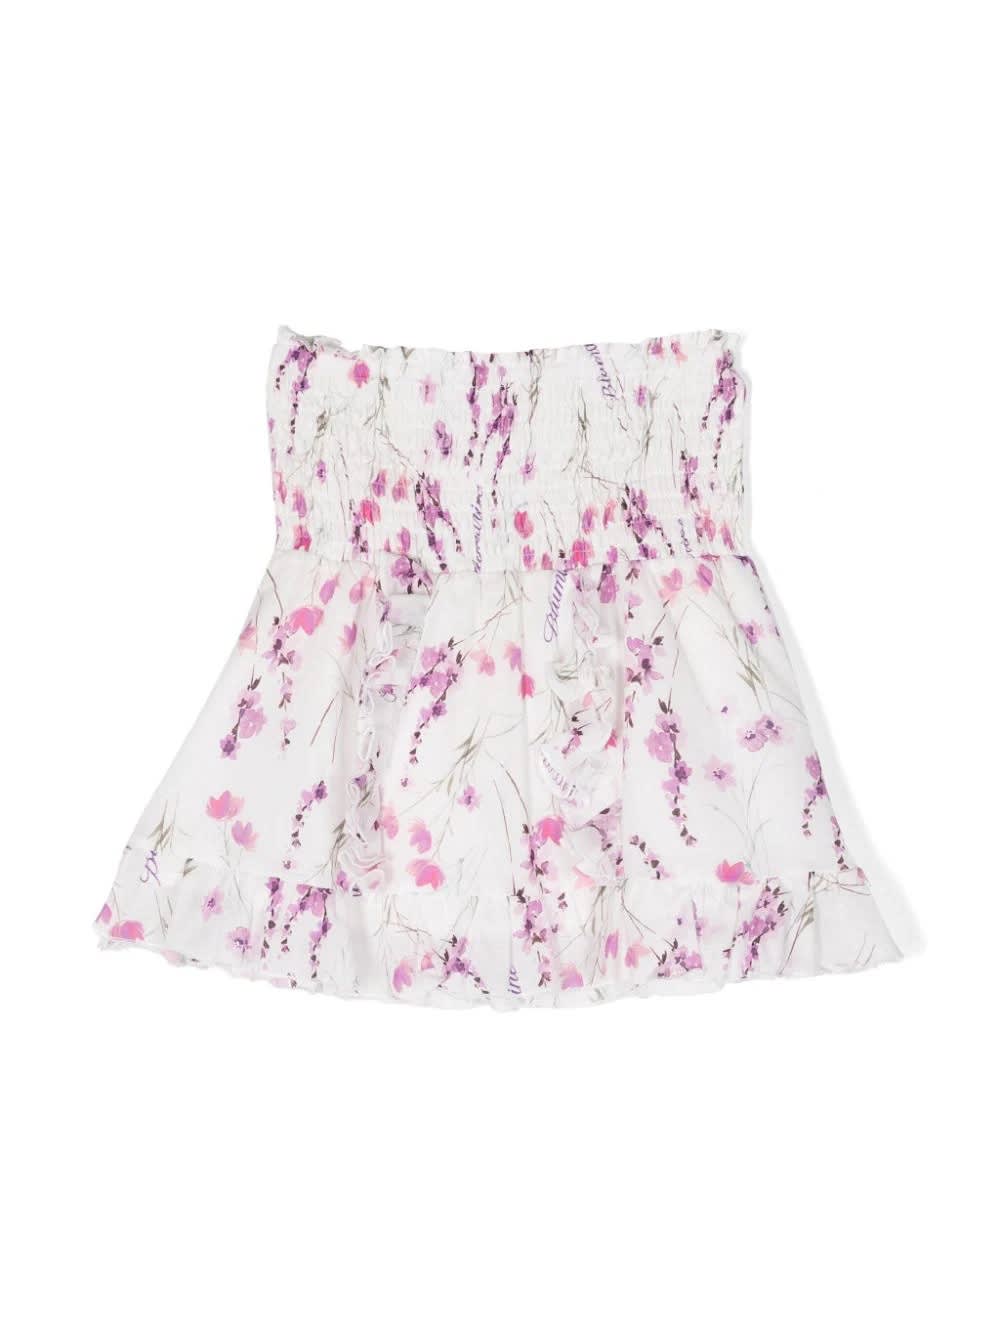 Shop Miss Blumarine White Miniskirt With Ruffles And Floral Print